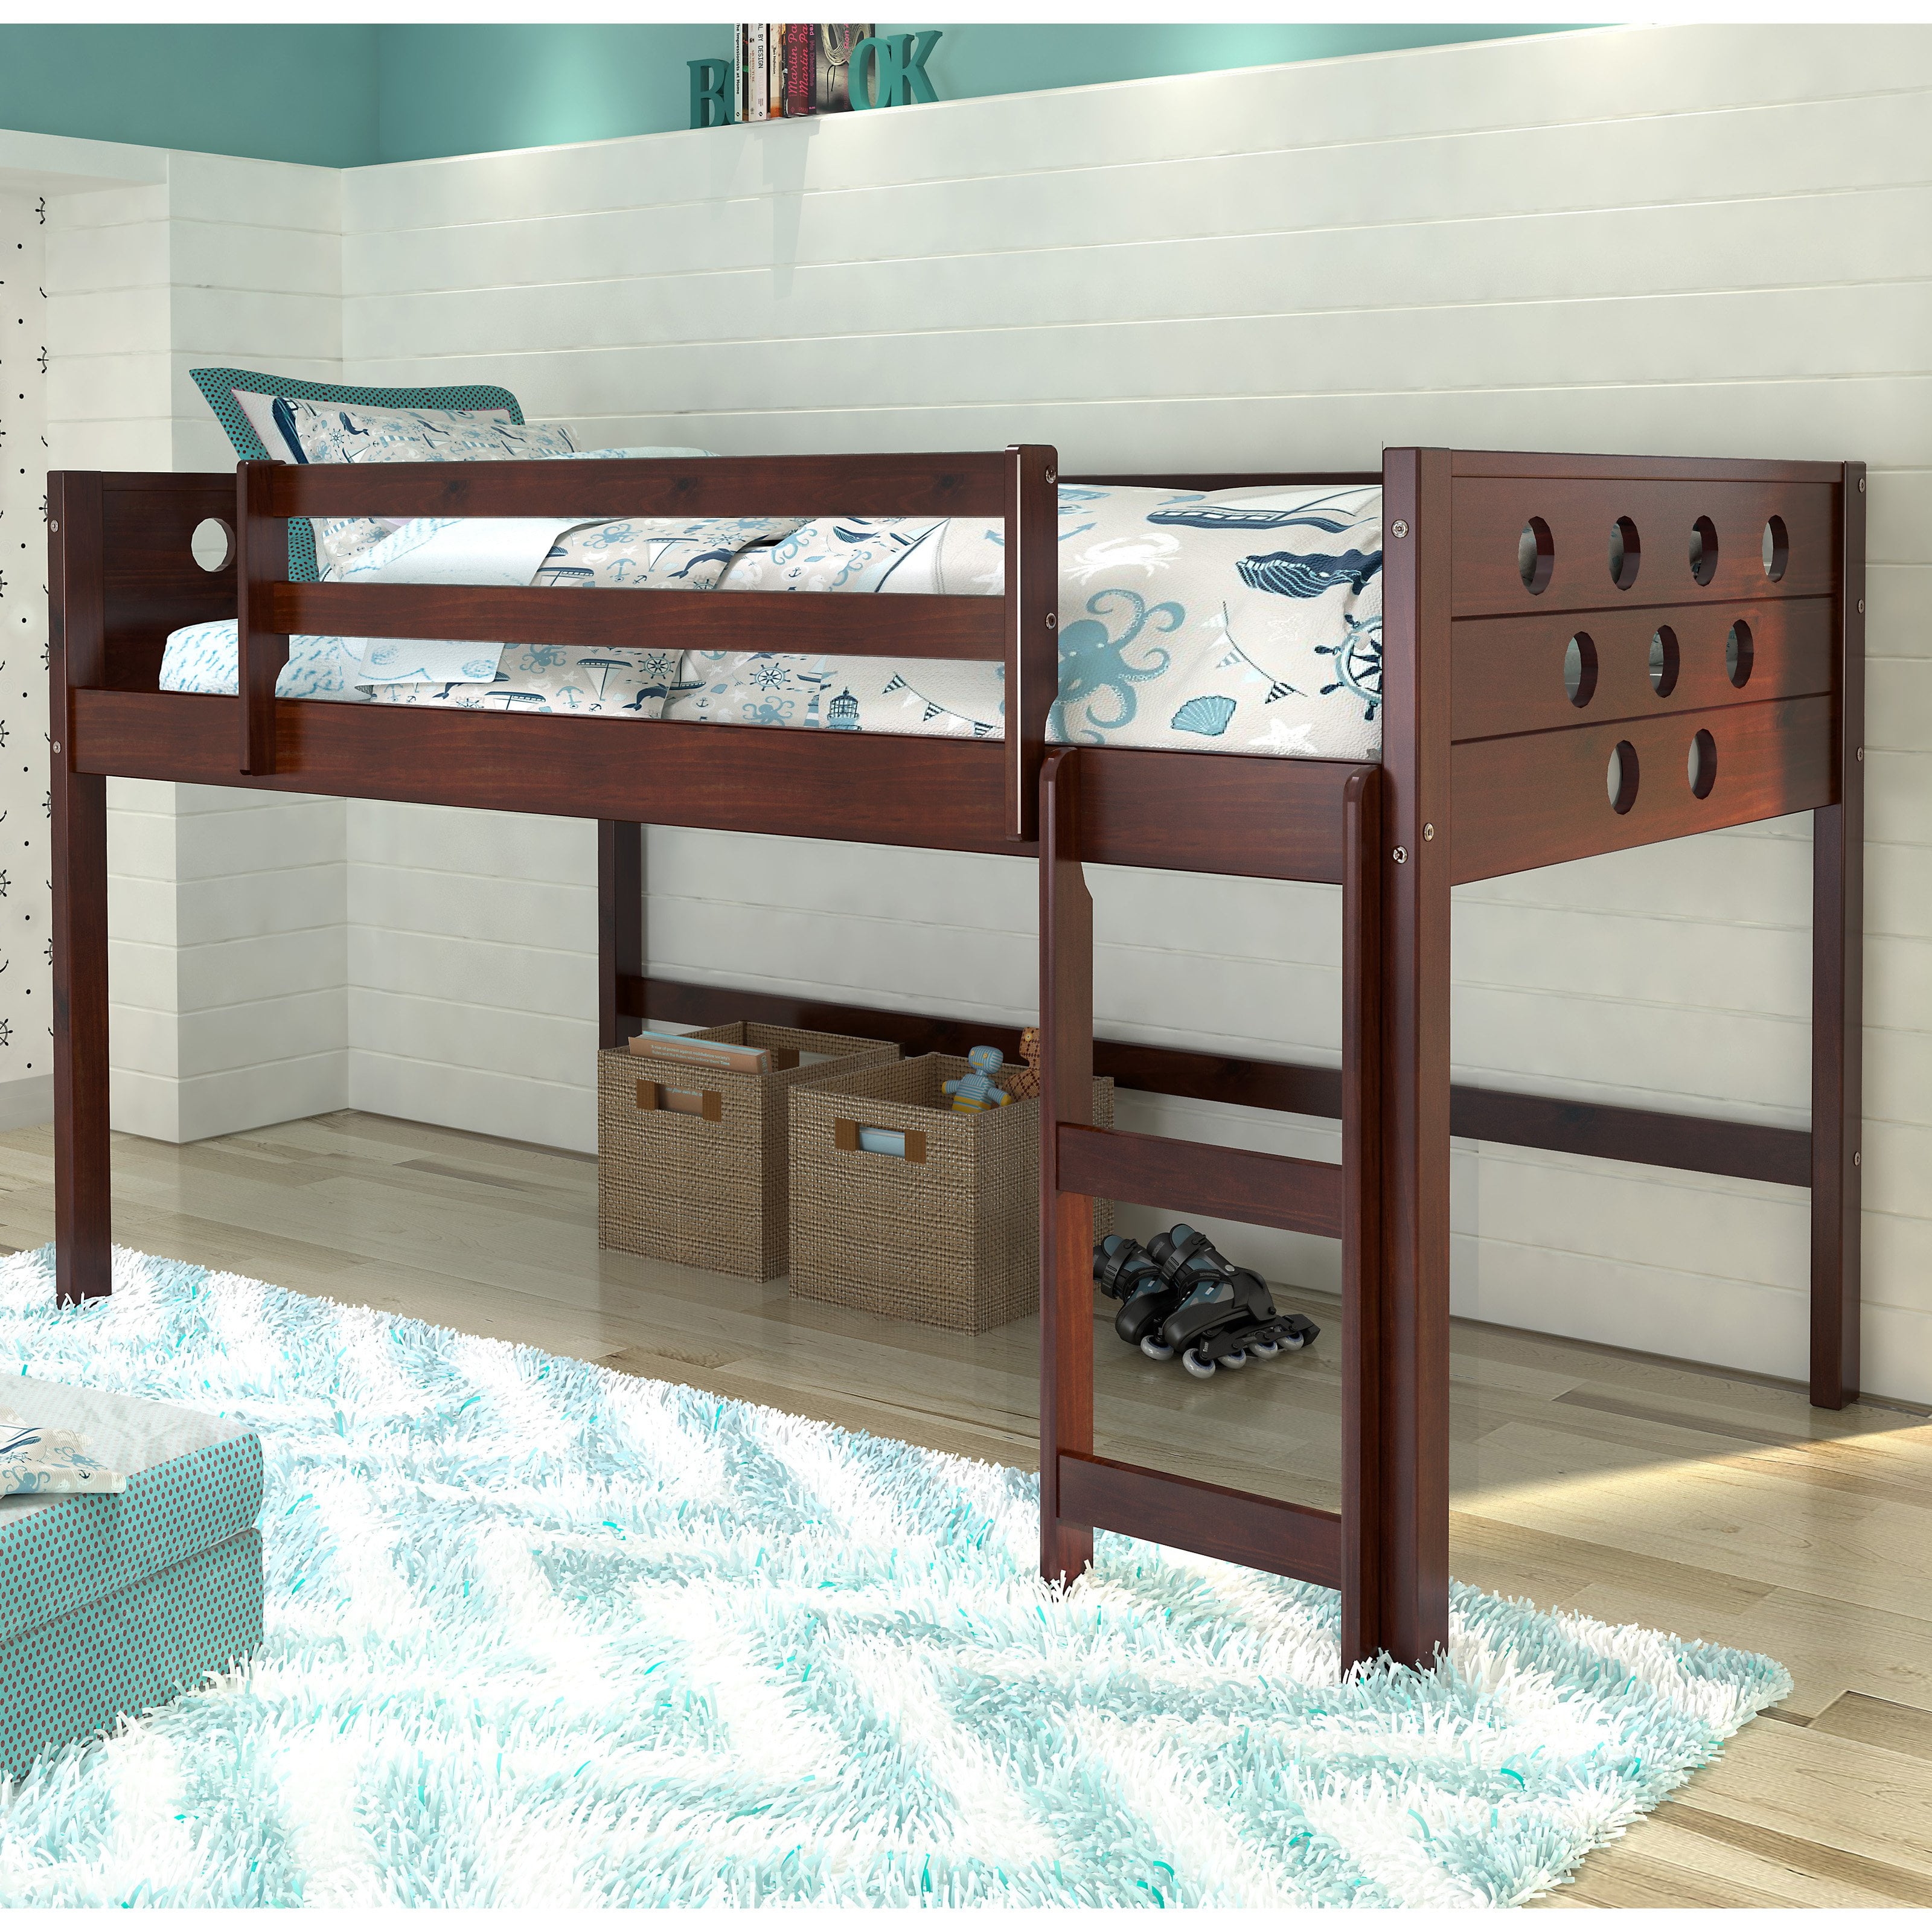 donco loft bed with desk